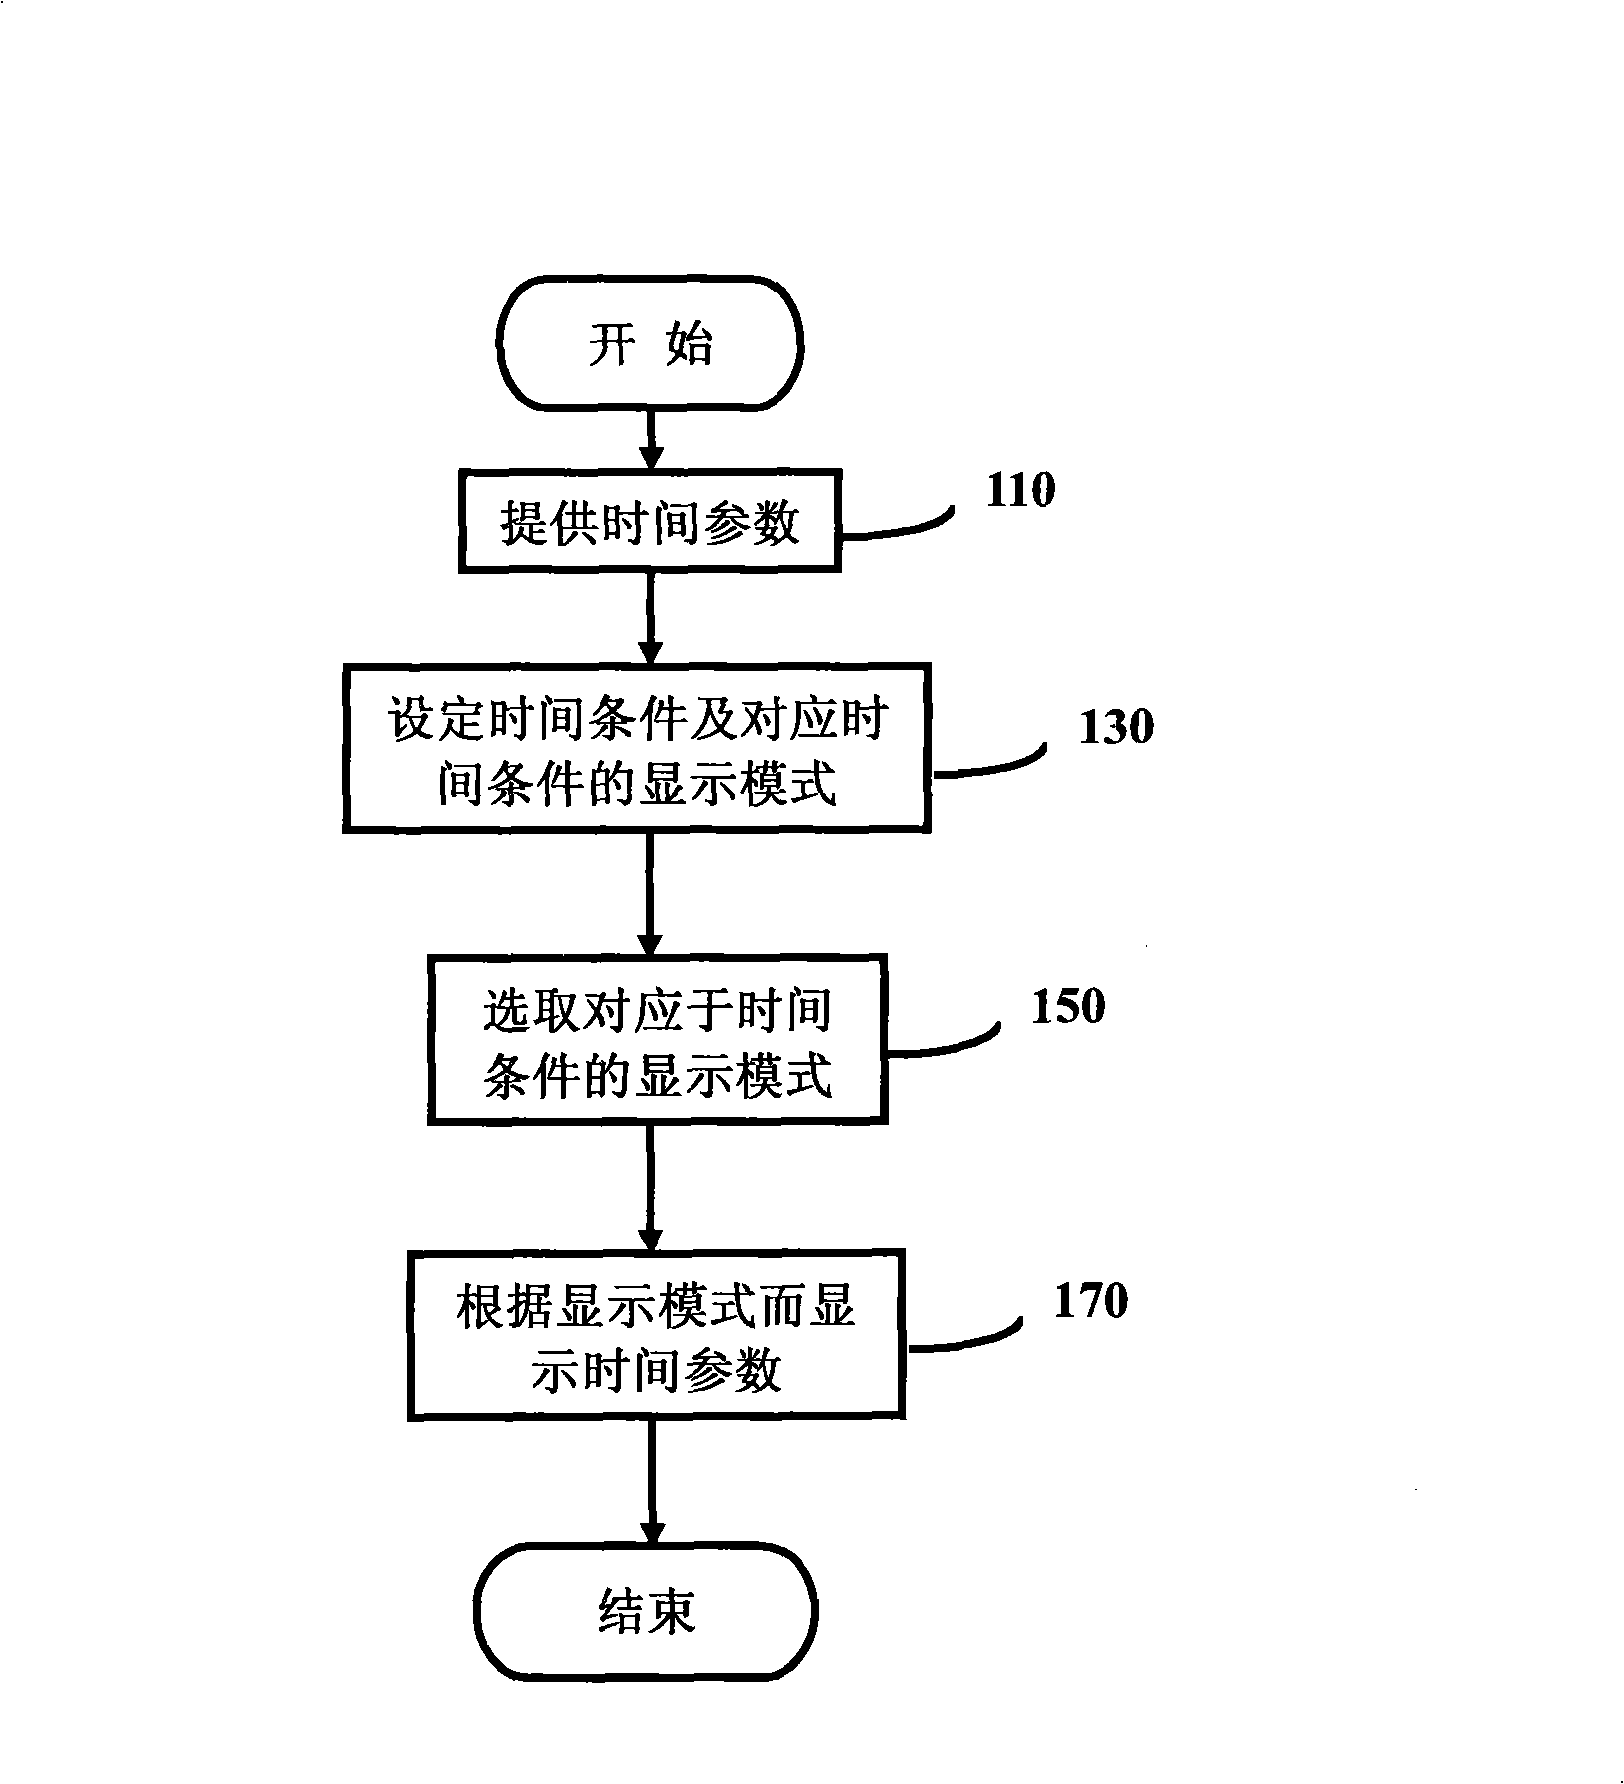 Method and apparatus for displaying electronic clock